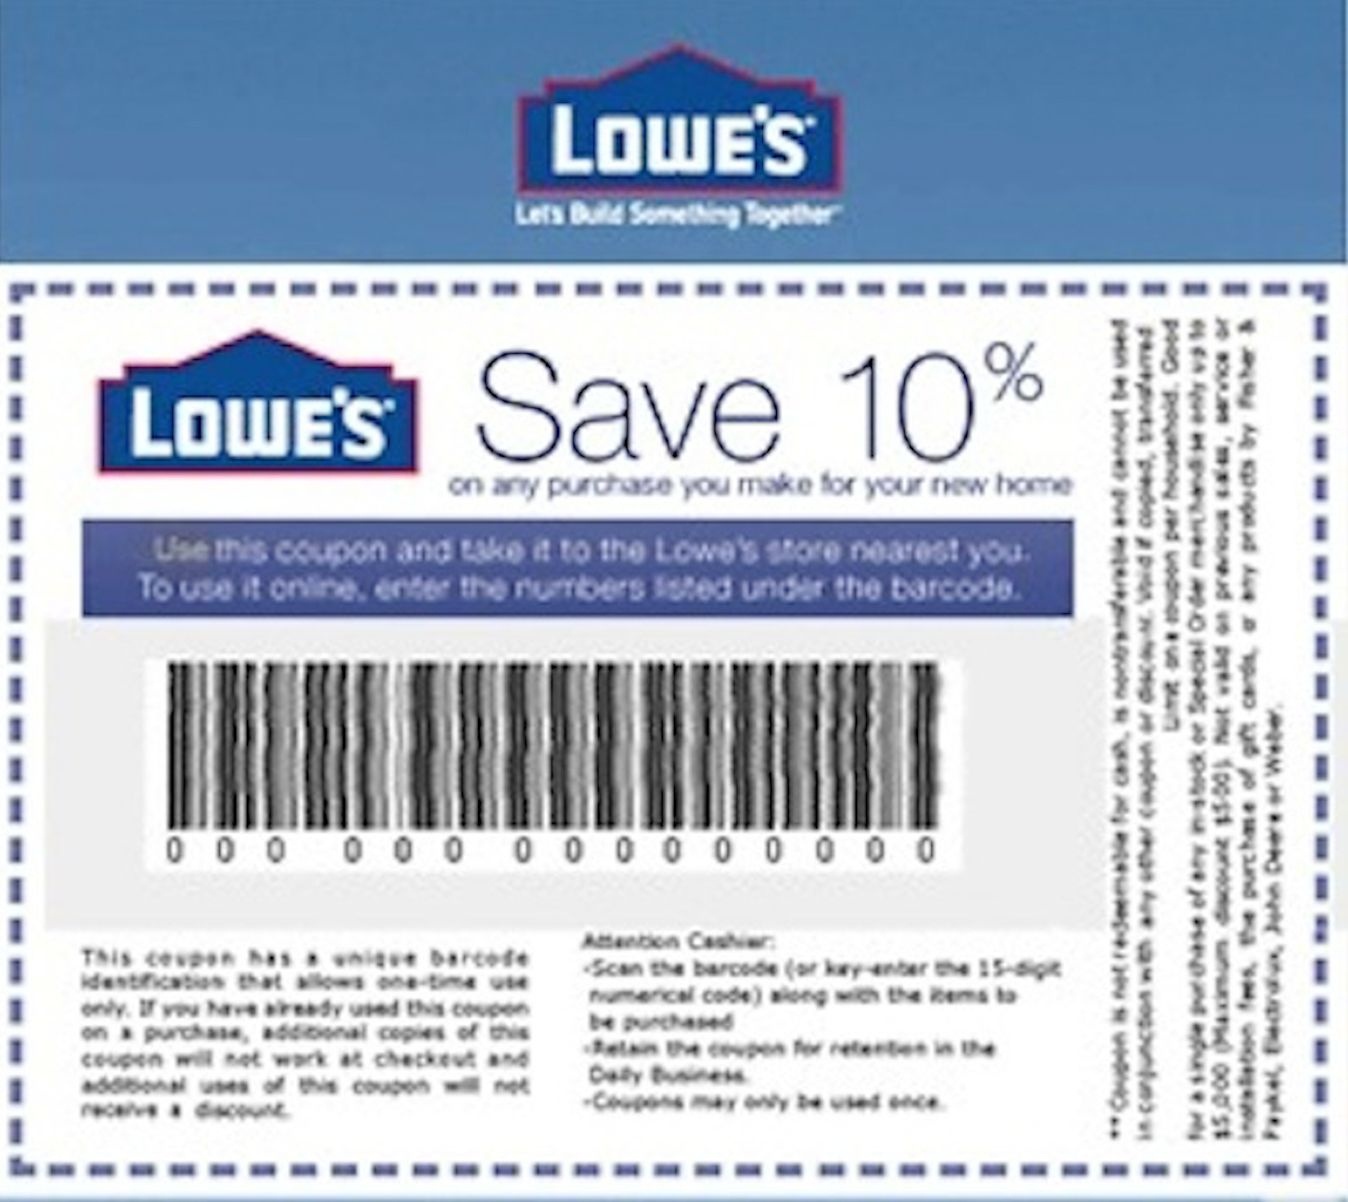 Coupons: Five (5X) Lowes 10% Off Printable-Coupons - Exp 5/31/17 - Free Printable Lowes Coupons